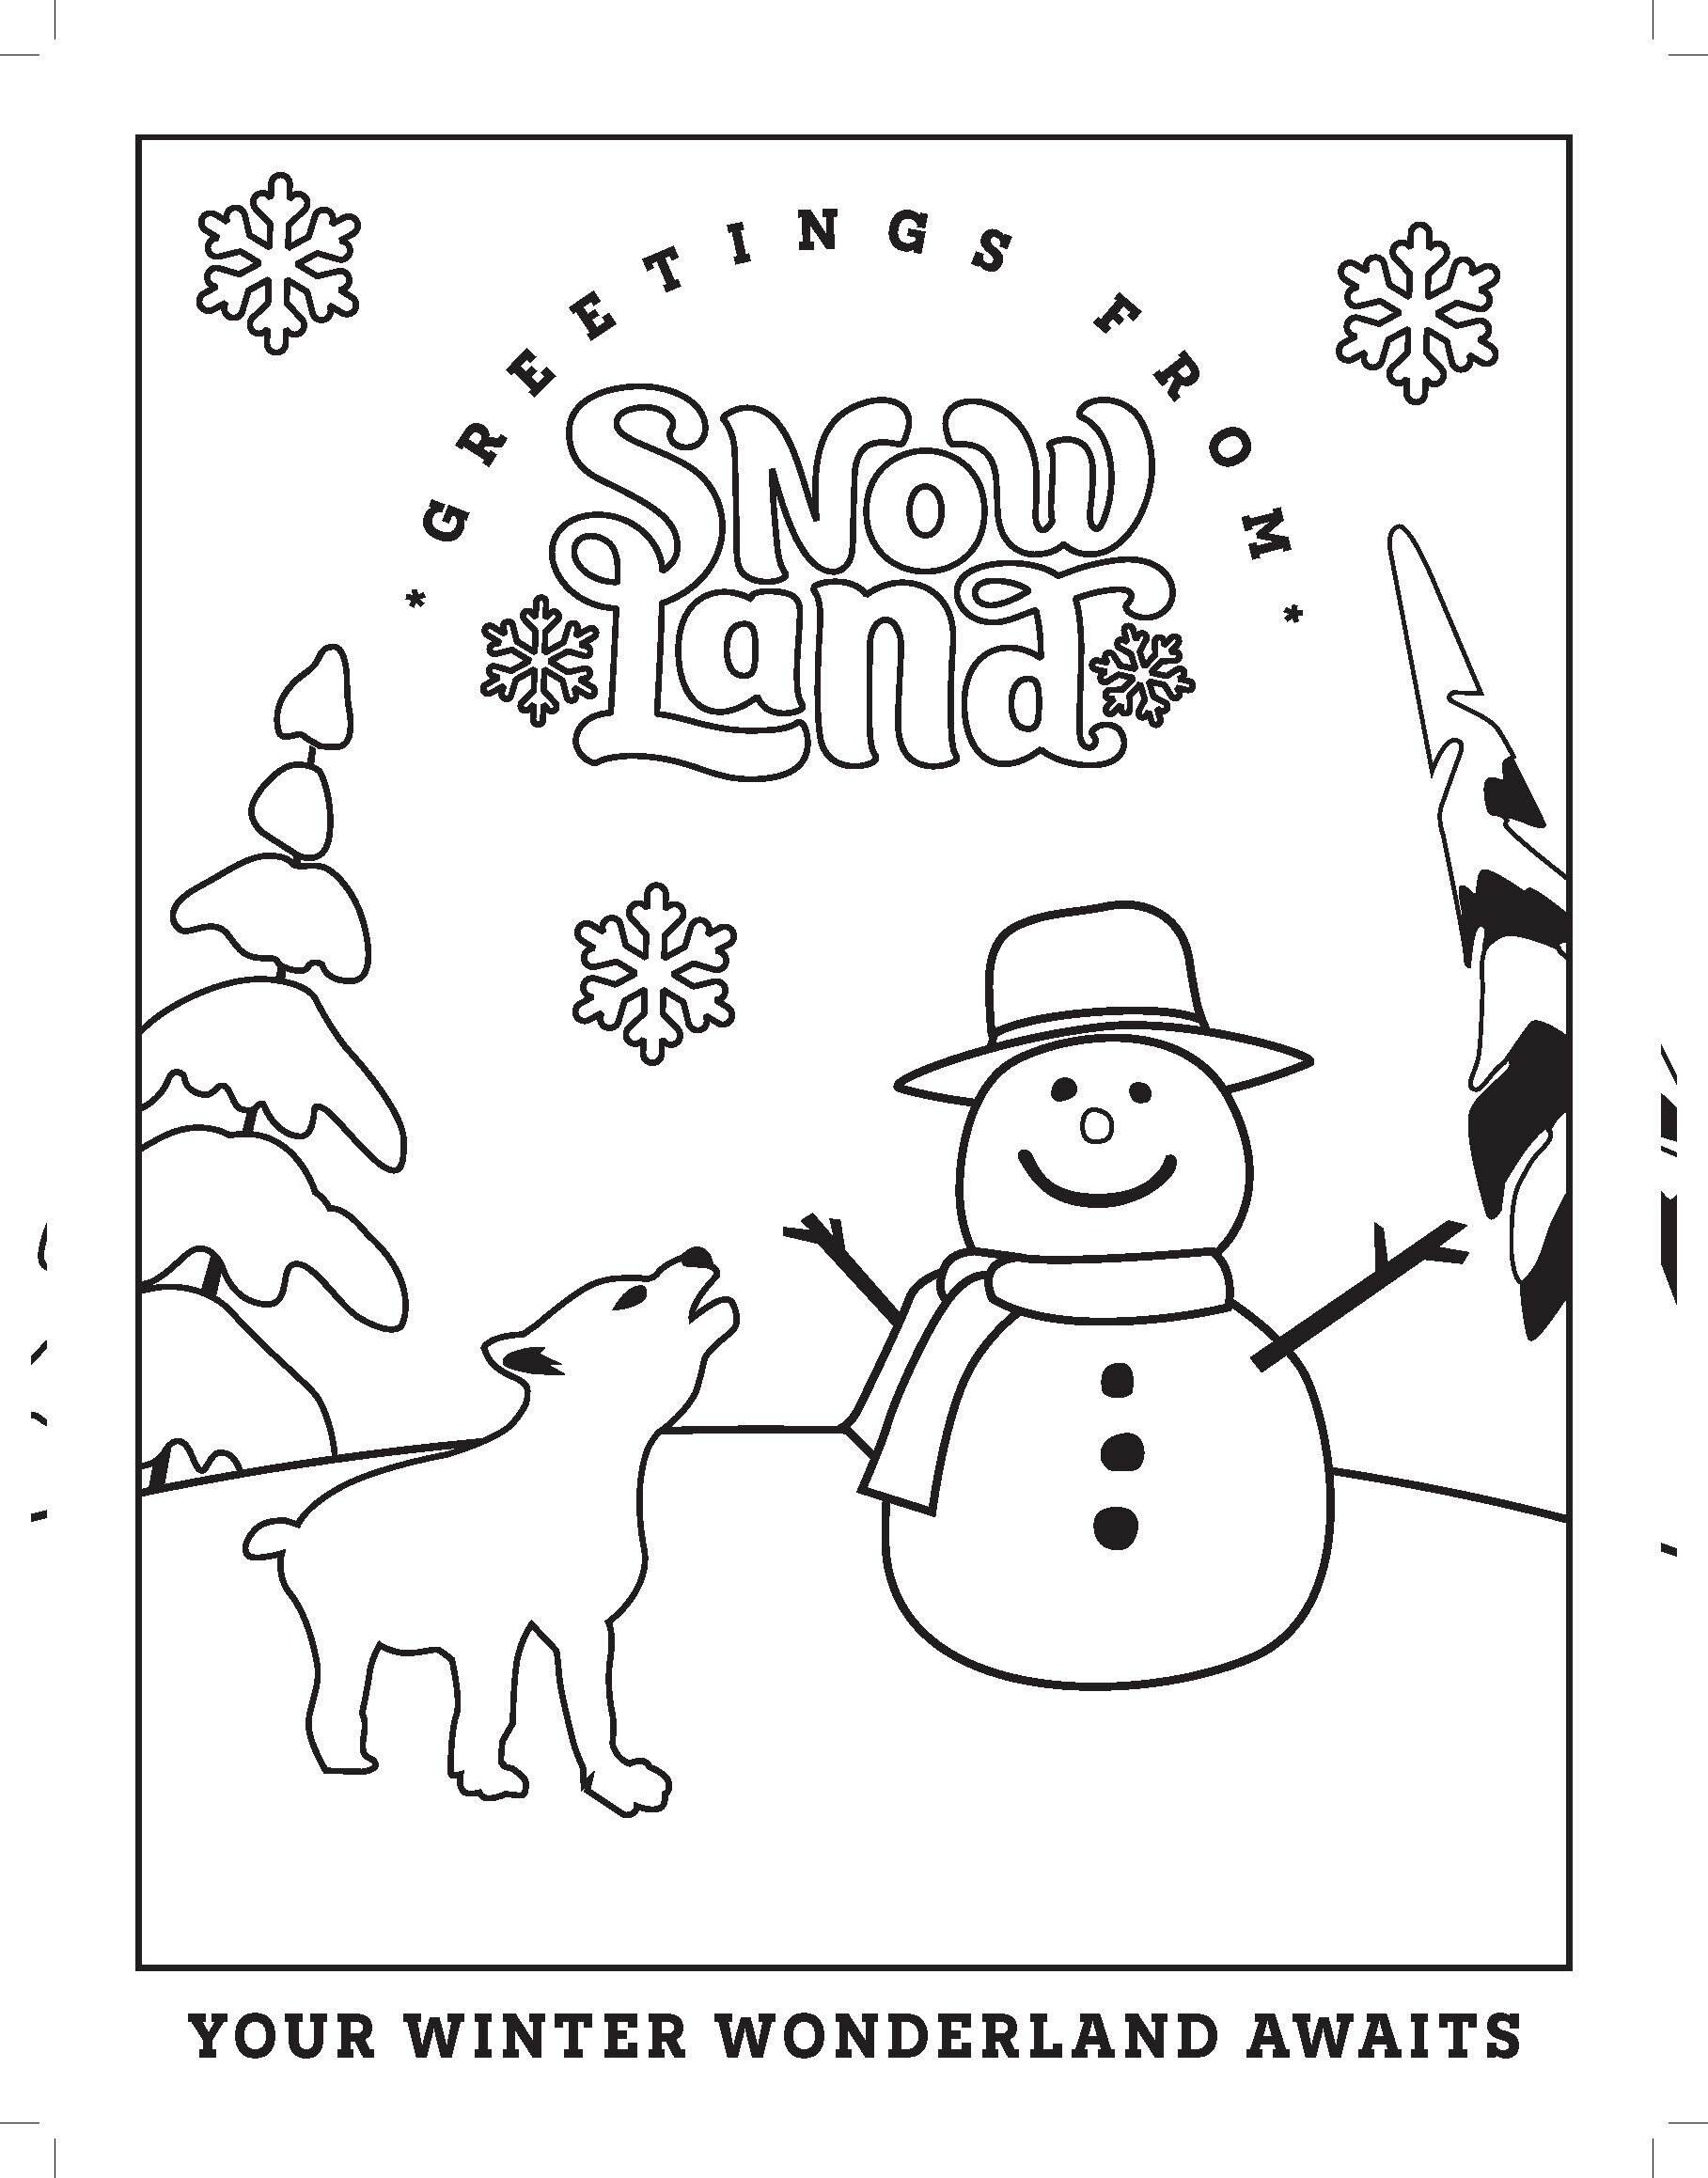 Snowland coloring pages